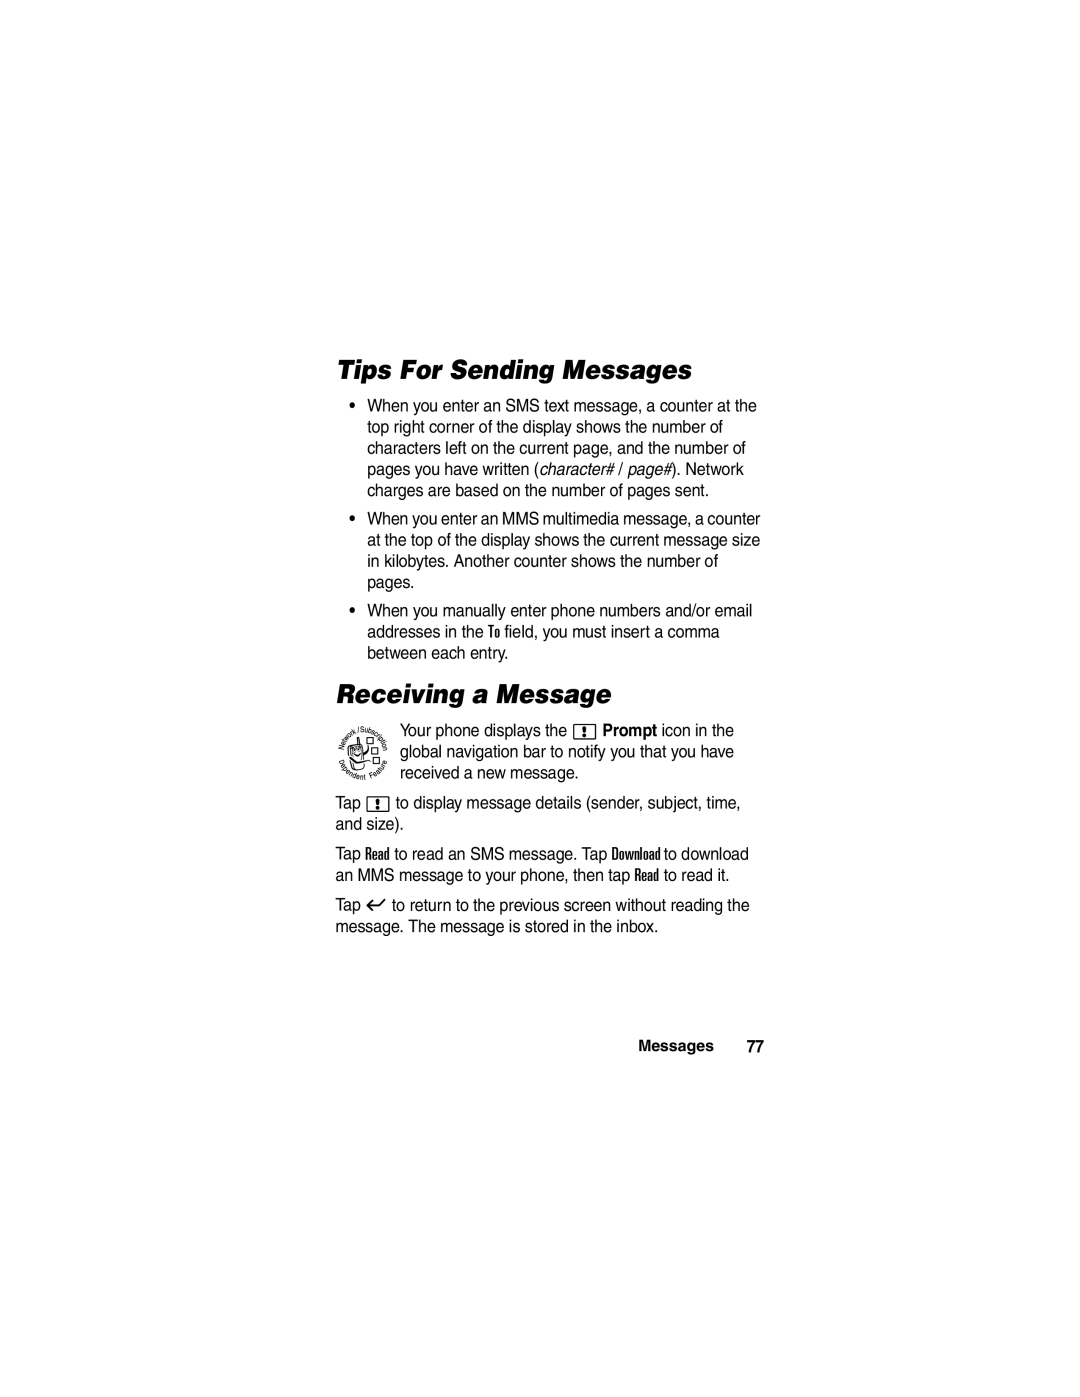 Motorola A780 manual Tips For Sending Messages, Receiving a Message 